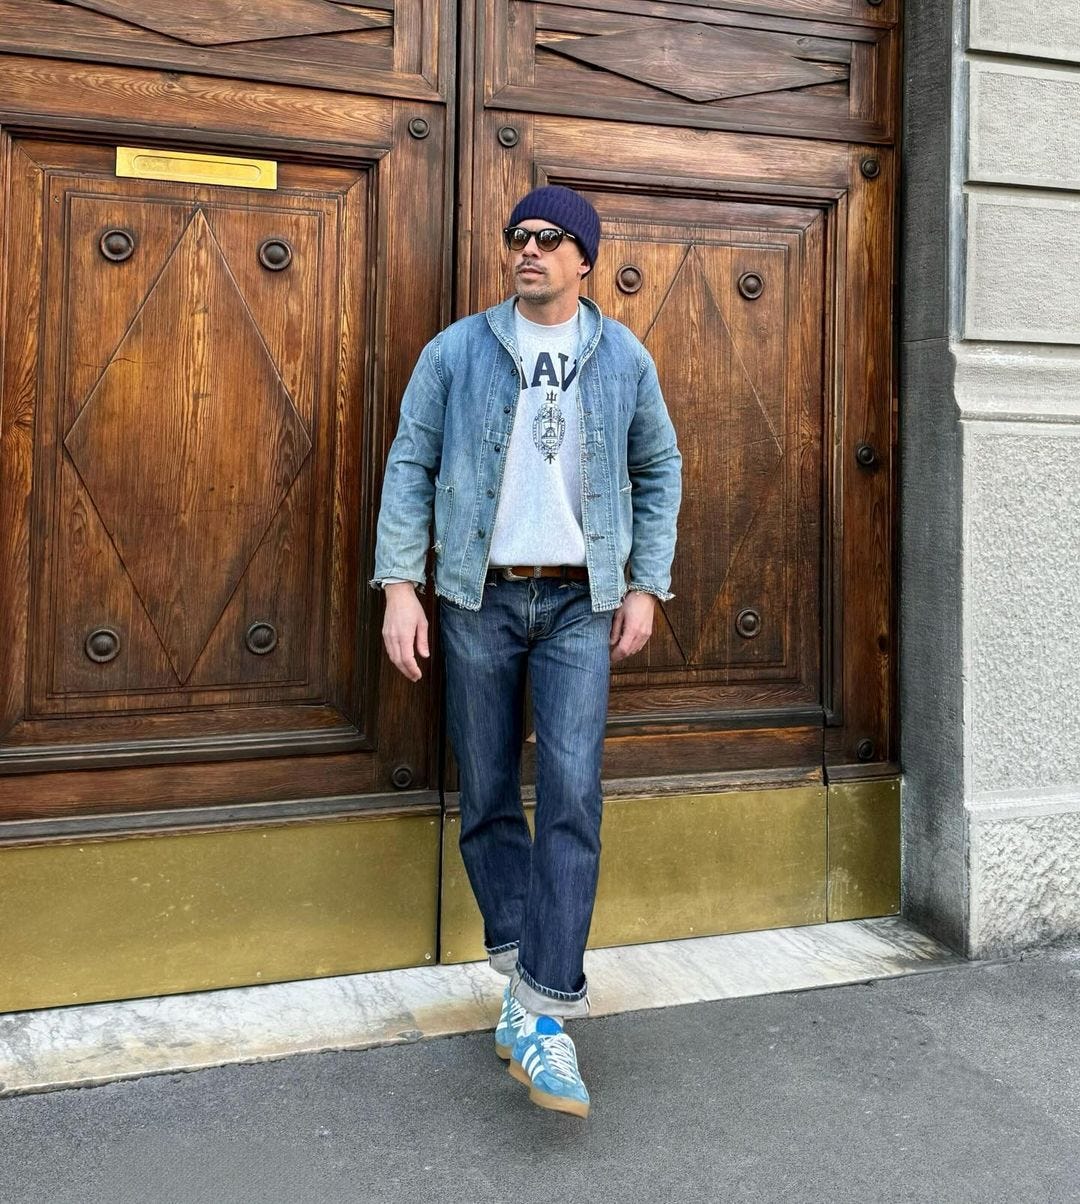 Casual style for men. Denim jeans and blue shirt combo.